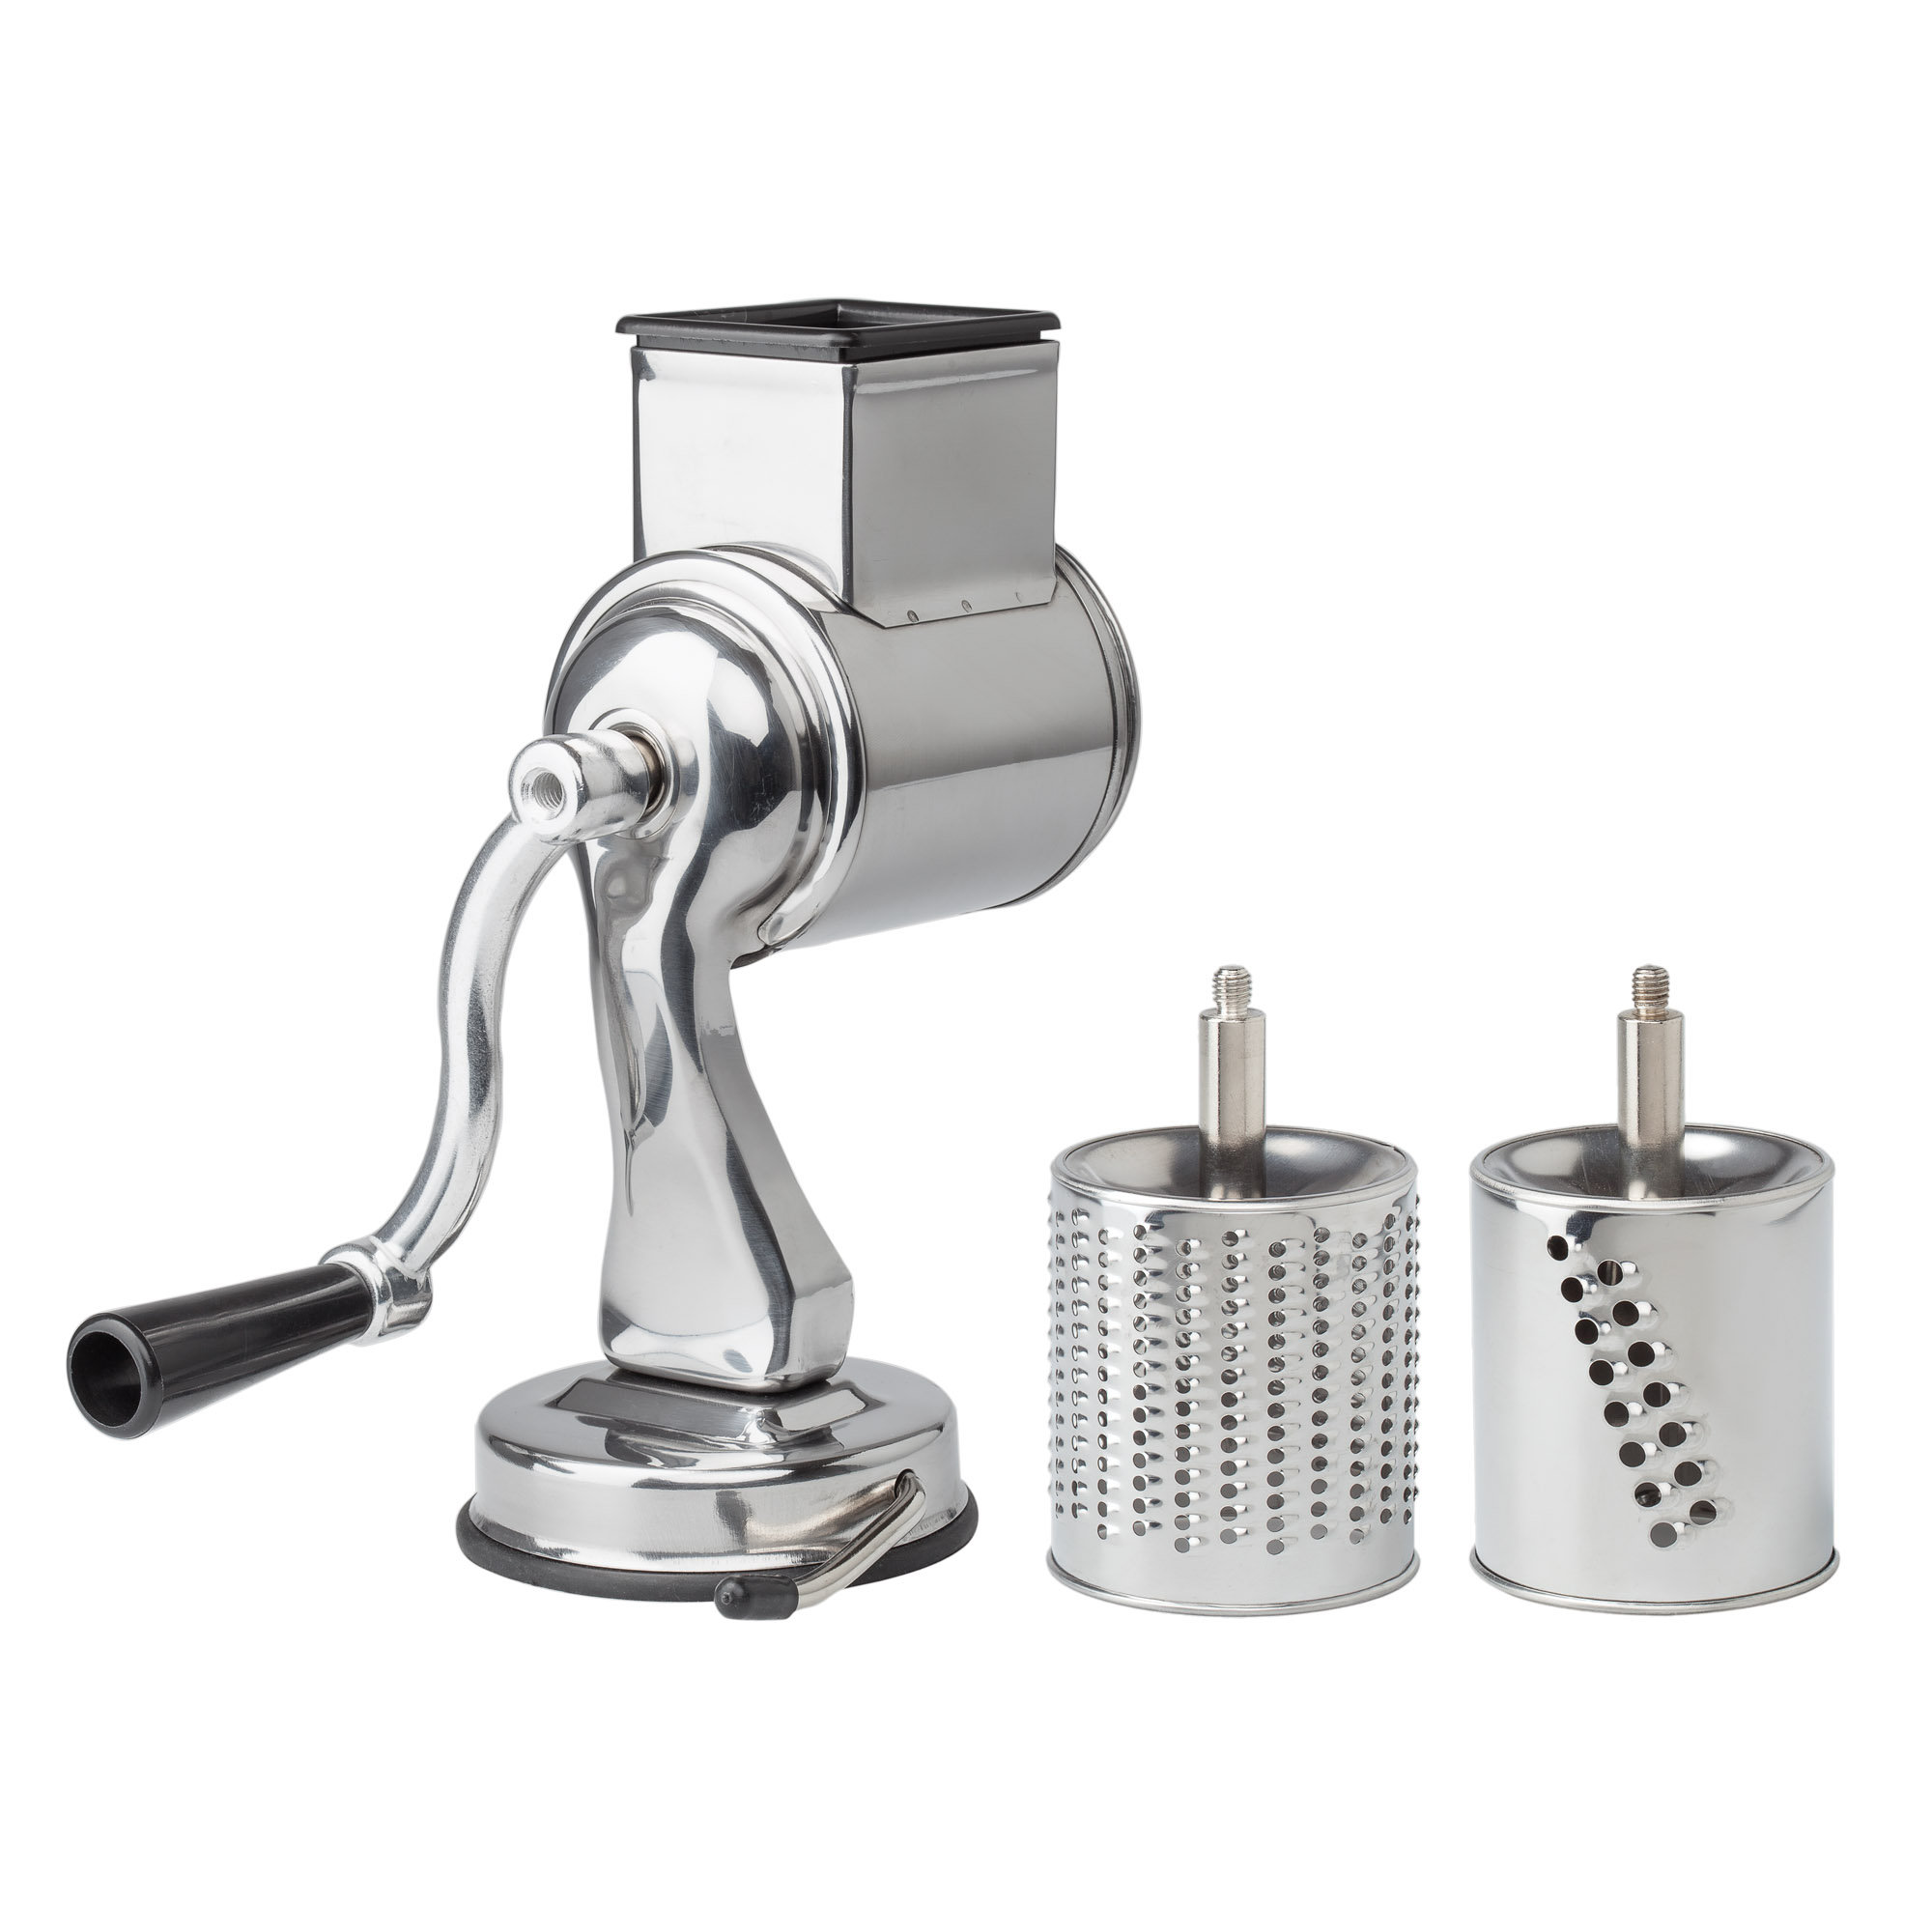 Westmark Cheese Grater with 3 Interchanging Stainless Steel Drums & Reviews